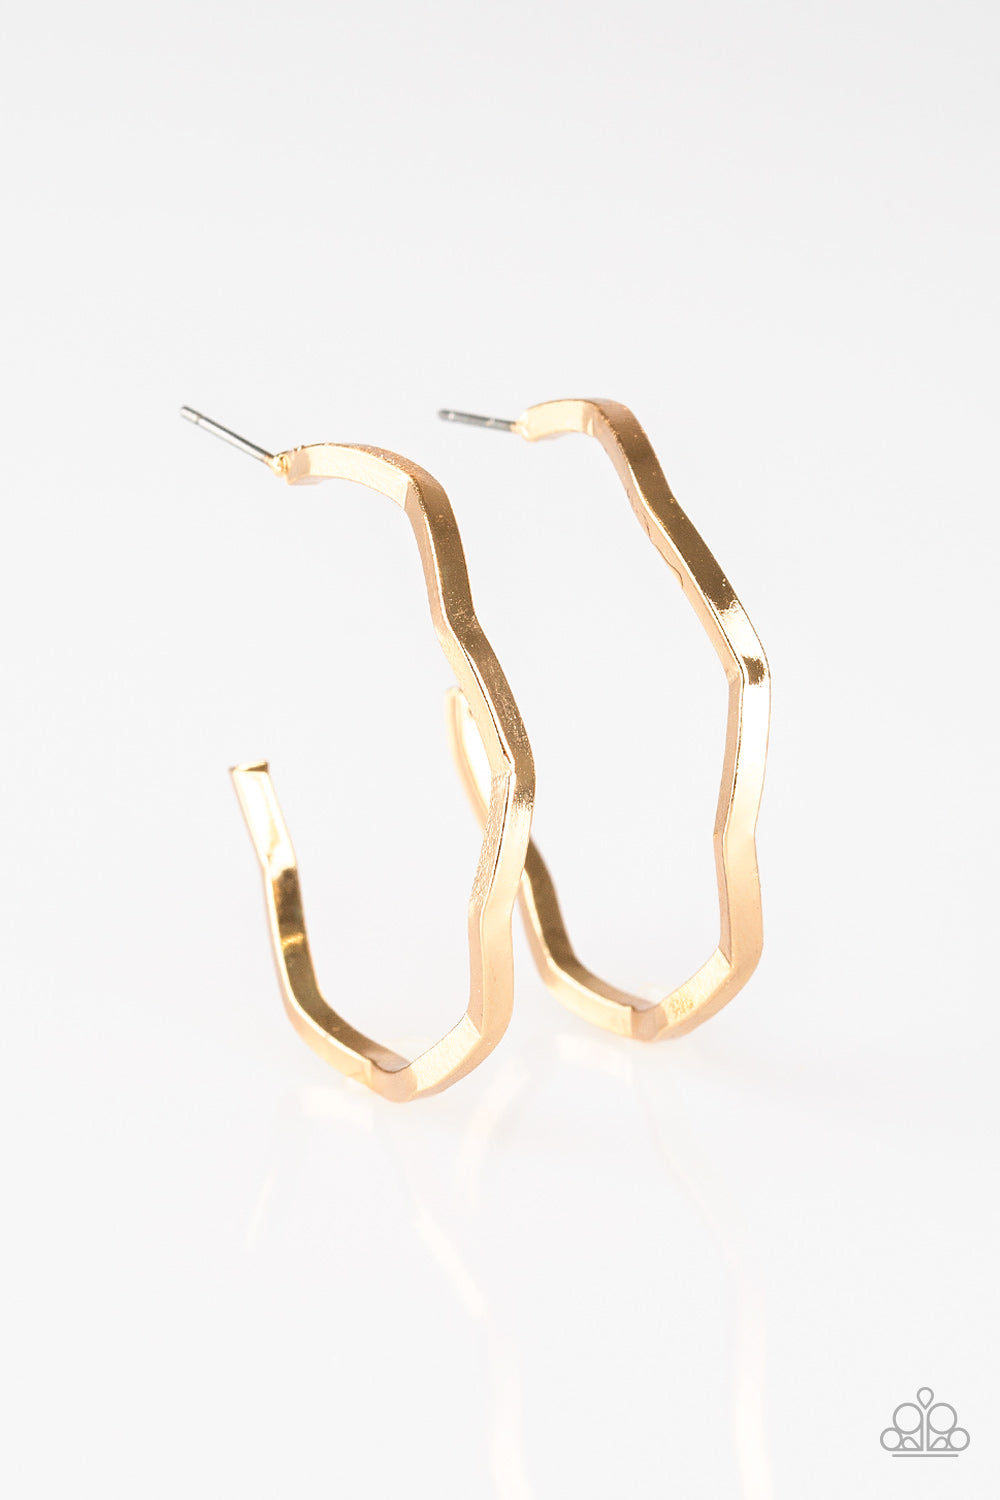 A glistening gold bar zigzags into an edgy hoop for a fierce industrial look.